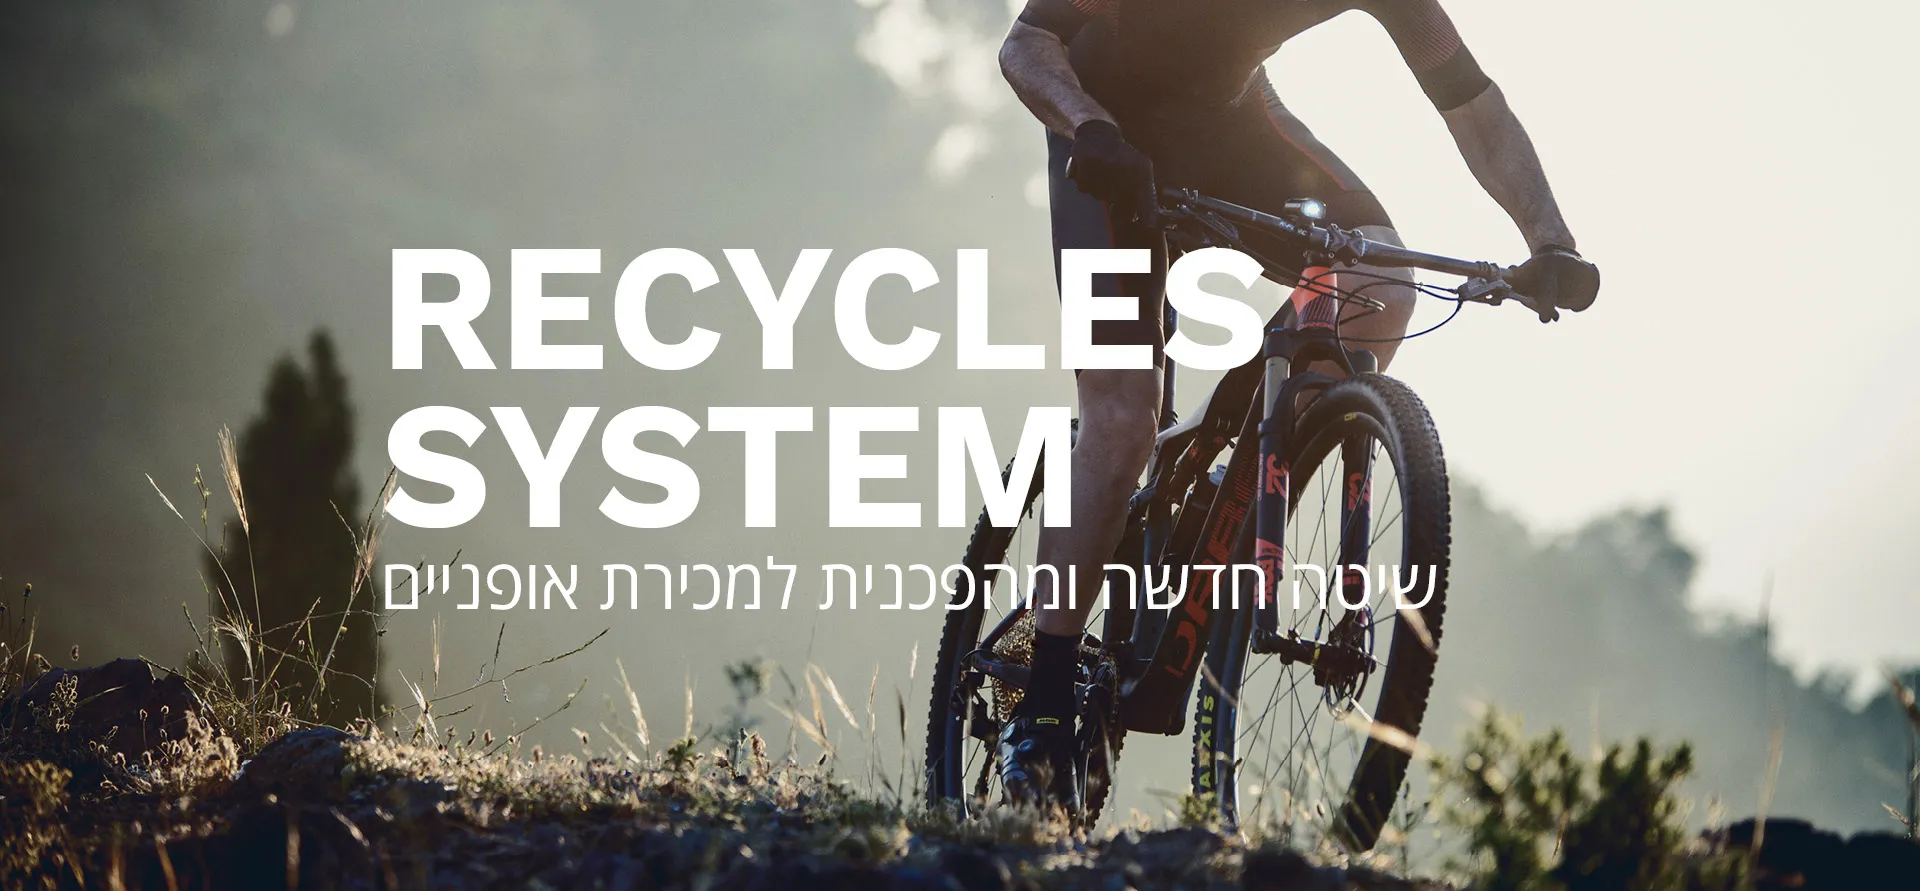 RECYCLES SYSTEMS 3